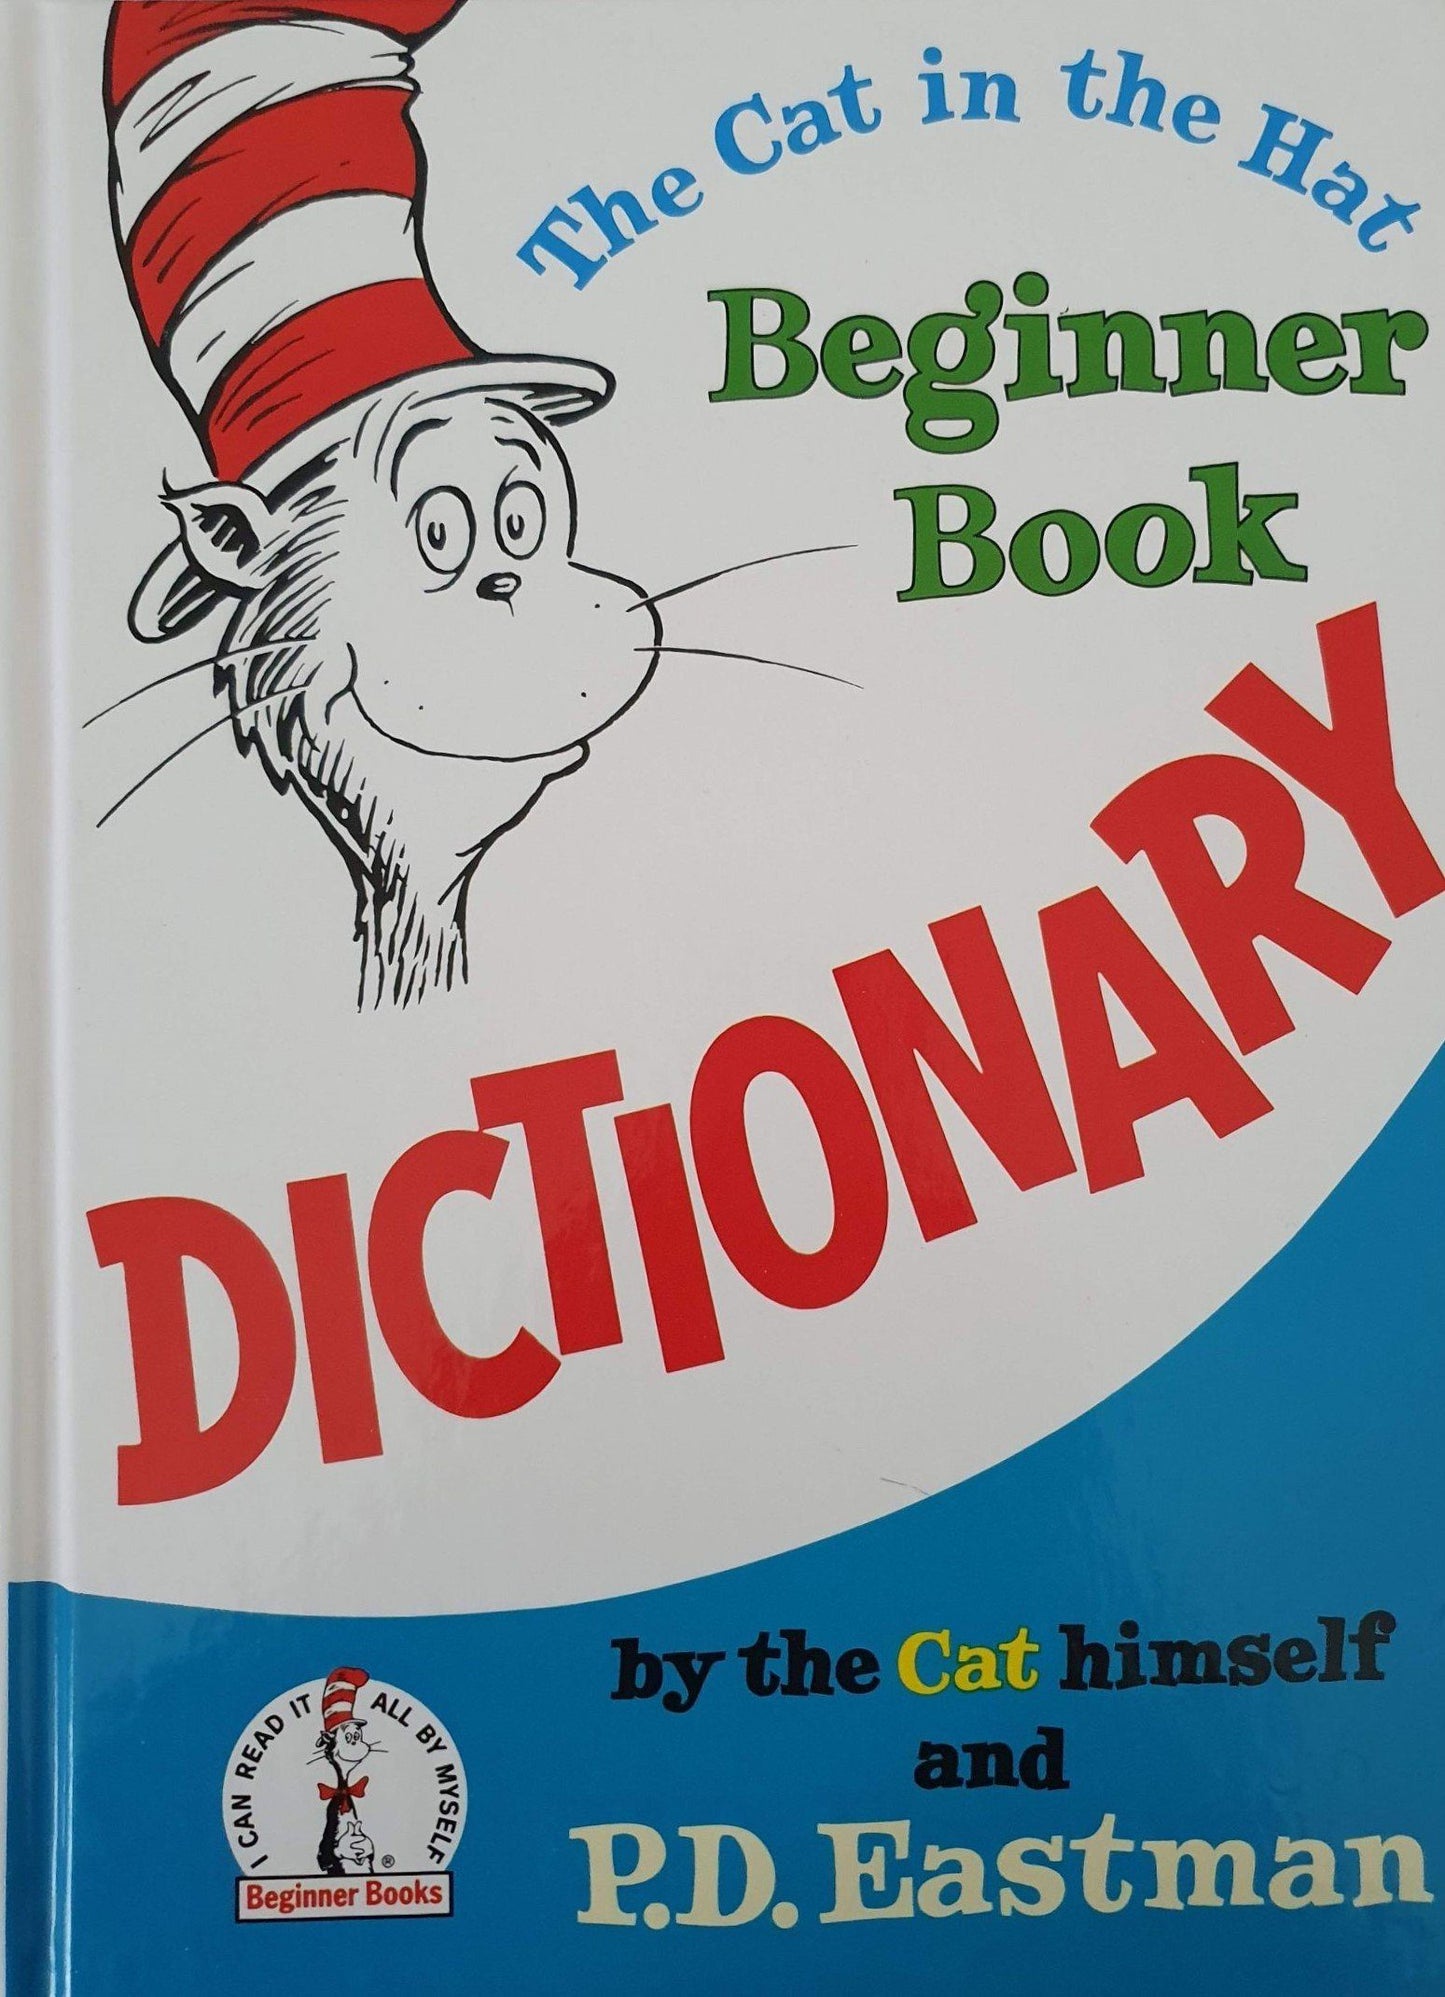 The Cat in the Hat Beginner Book Dictionary Like New Not Applicable  (4606867832887)